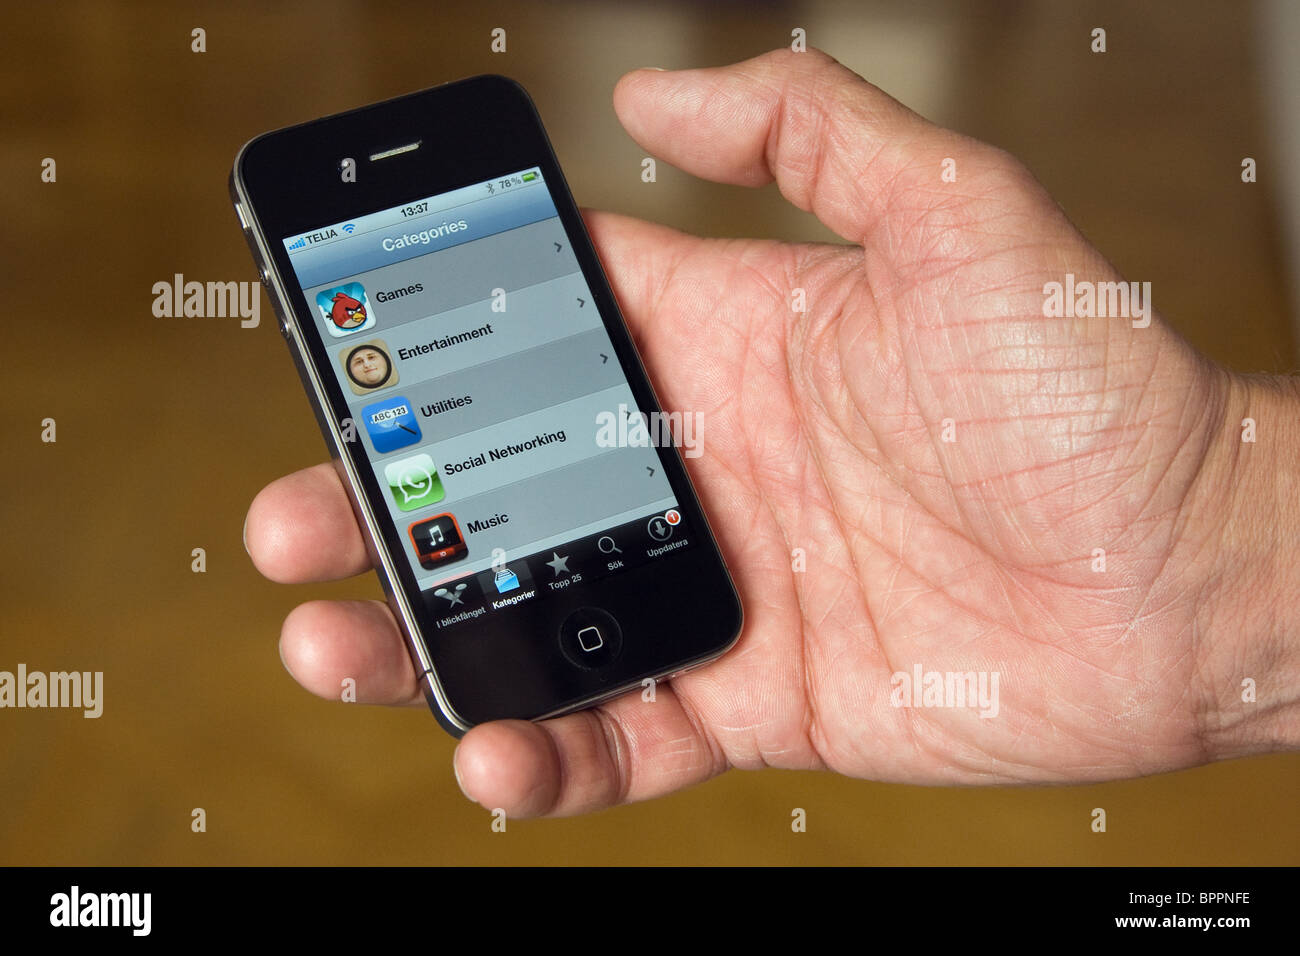 The iPhone 4 in the palm of the hand of a man. On the screen you can see the App Store. Stock Photo